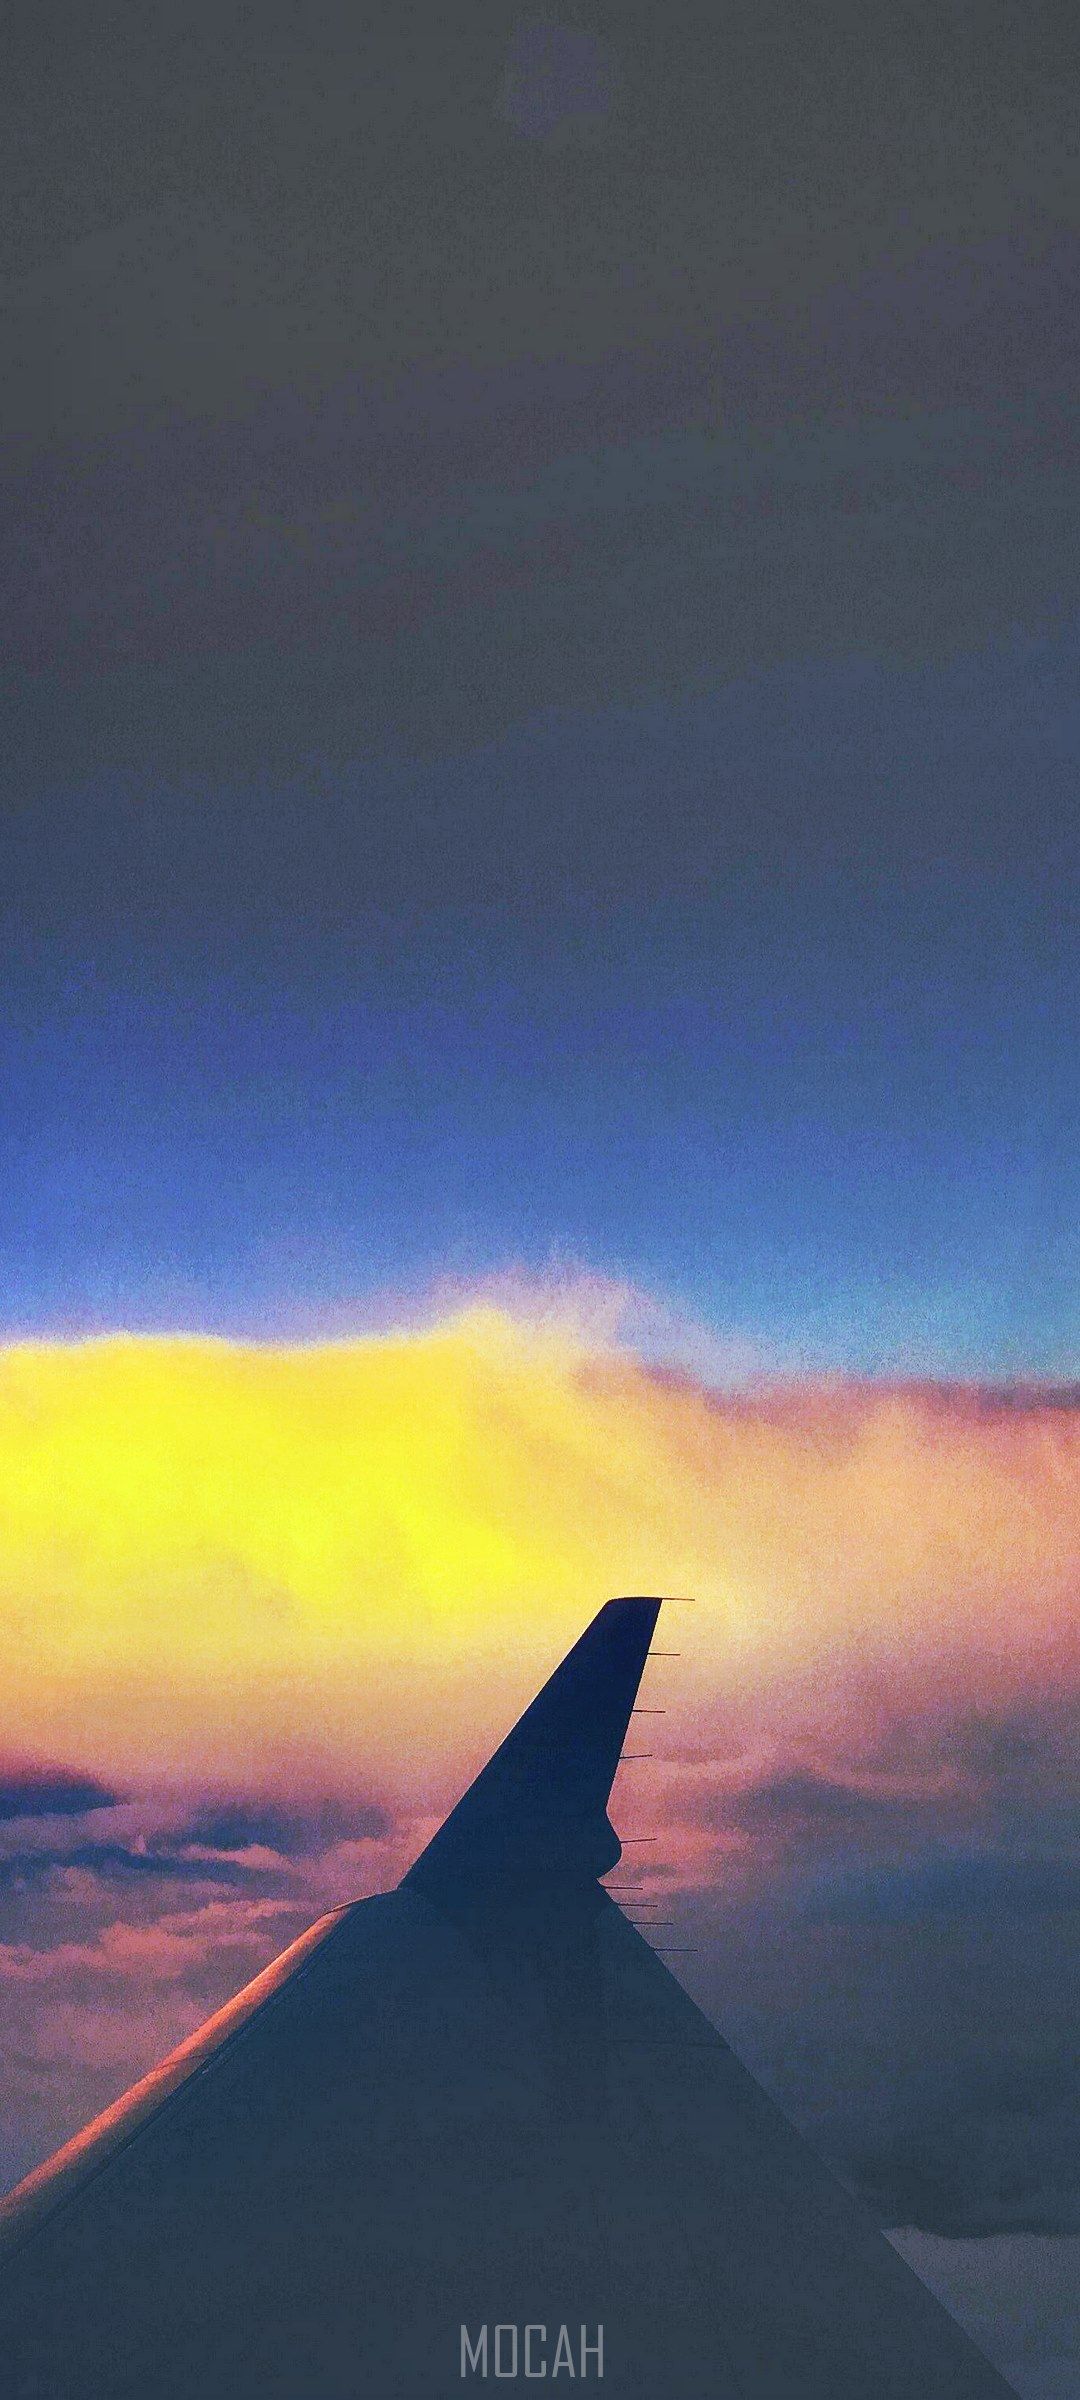 IPhone wallpaper of a plane wing with a sunset in the background - Travel